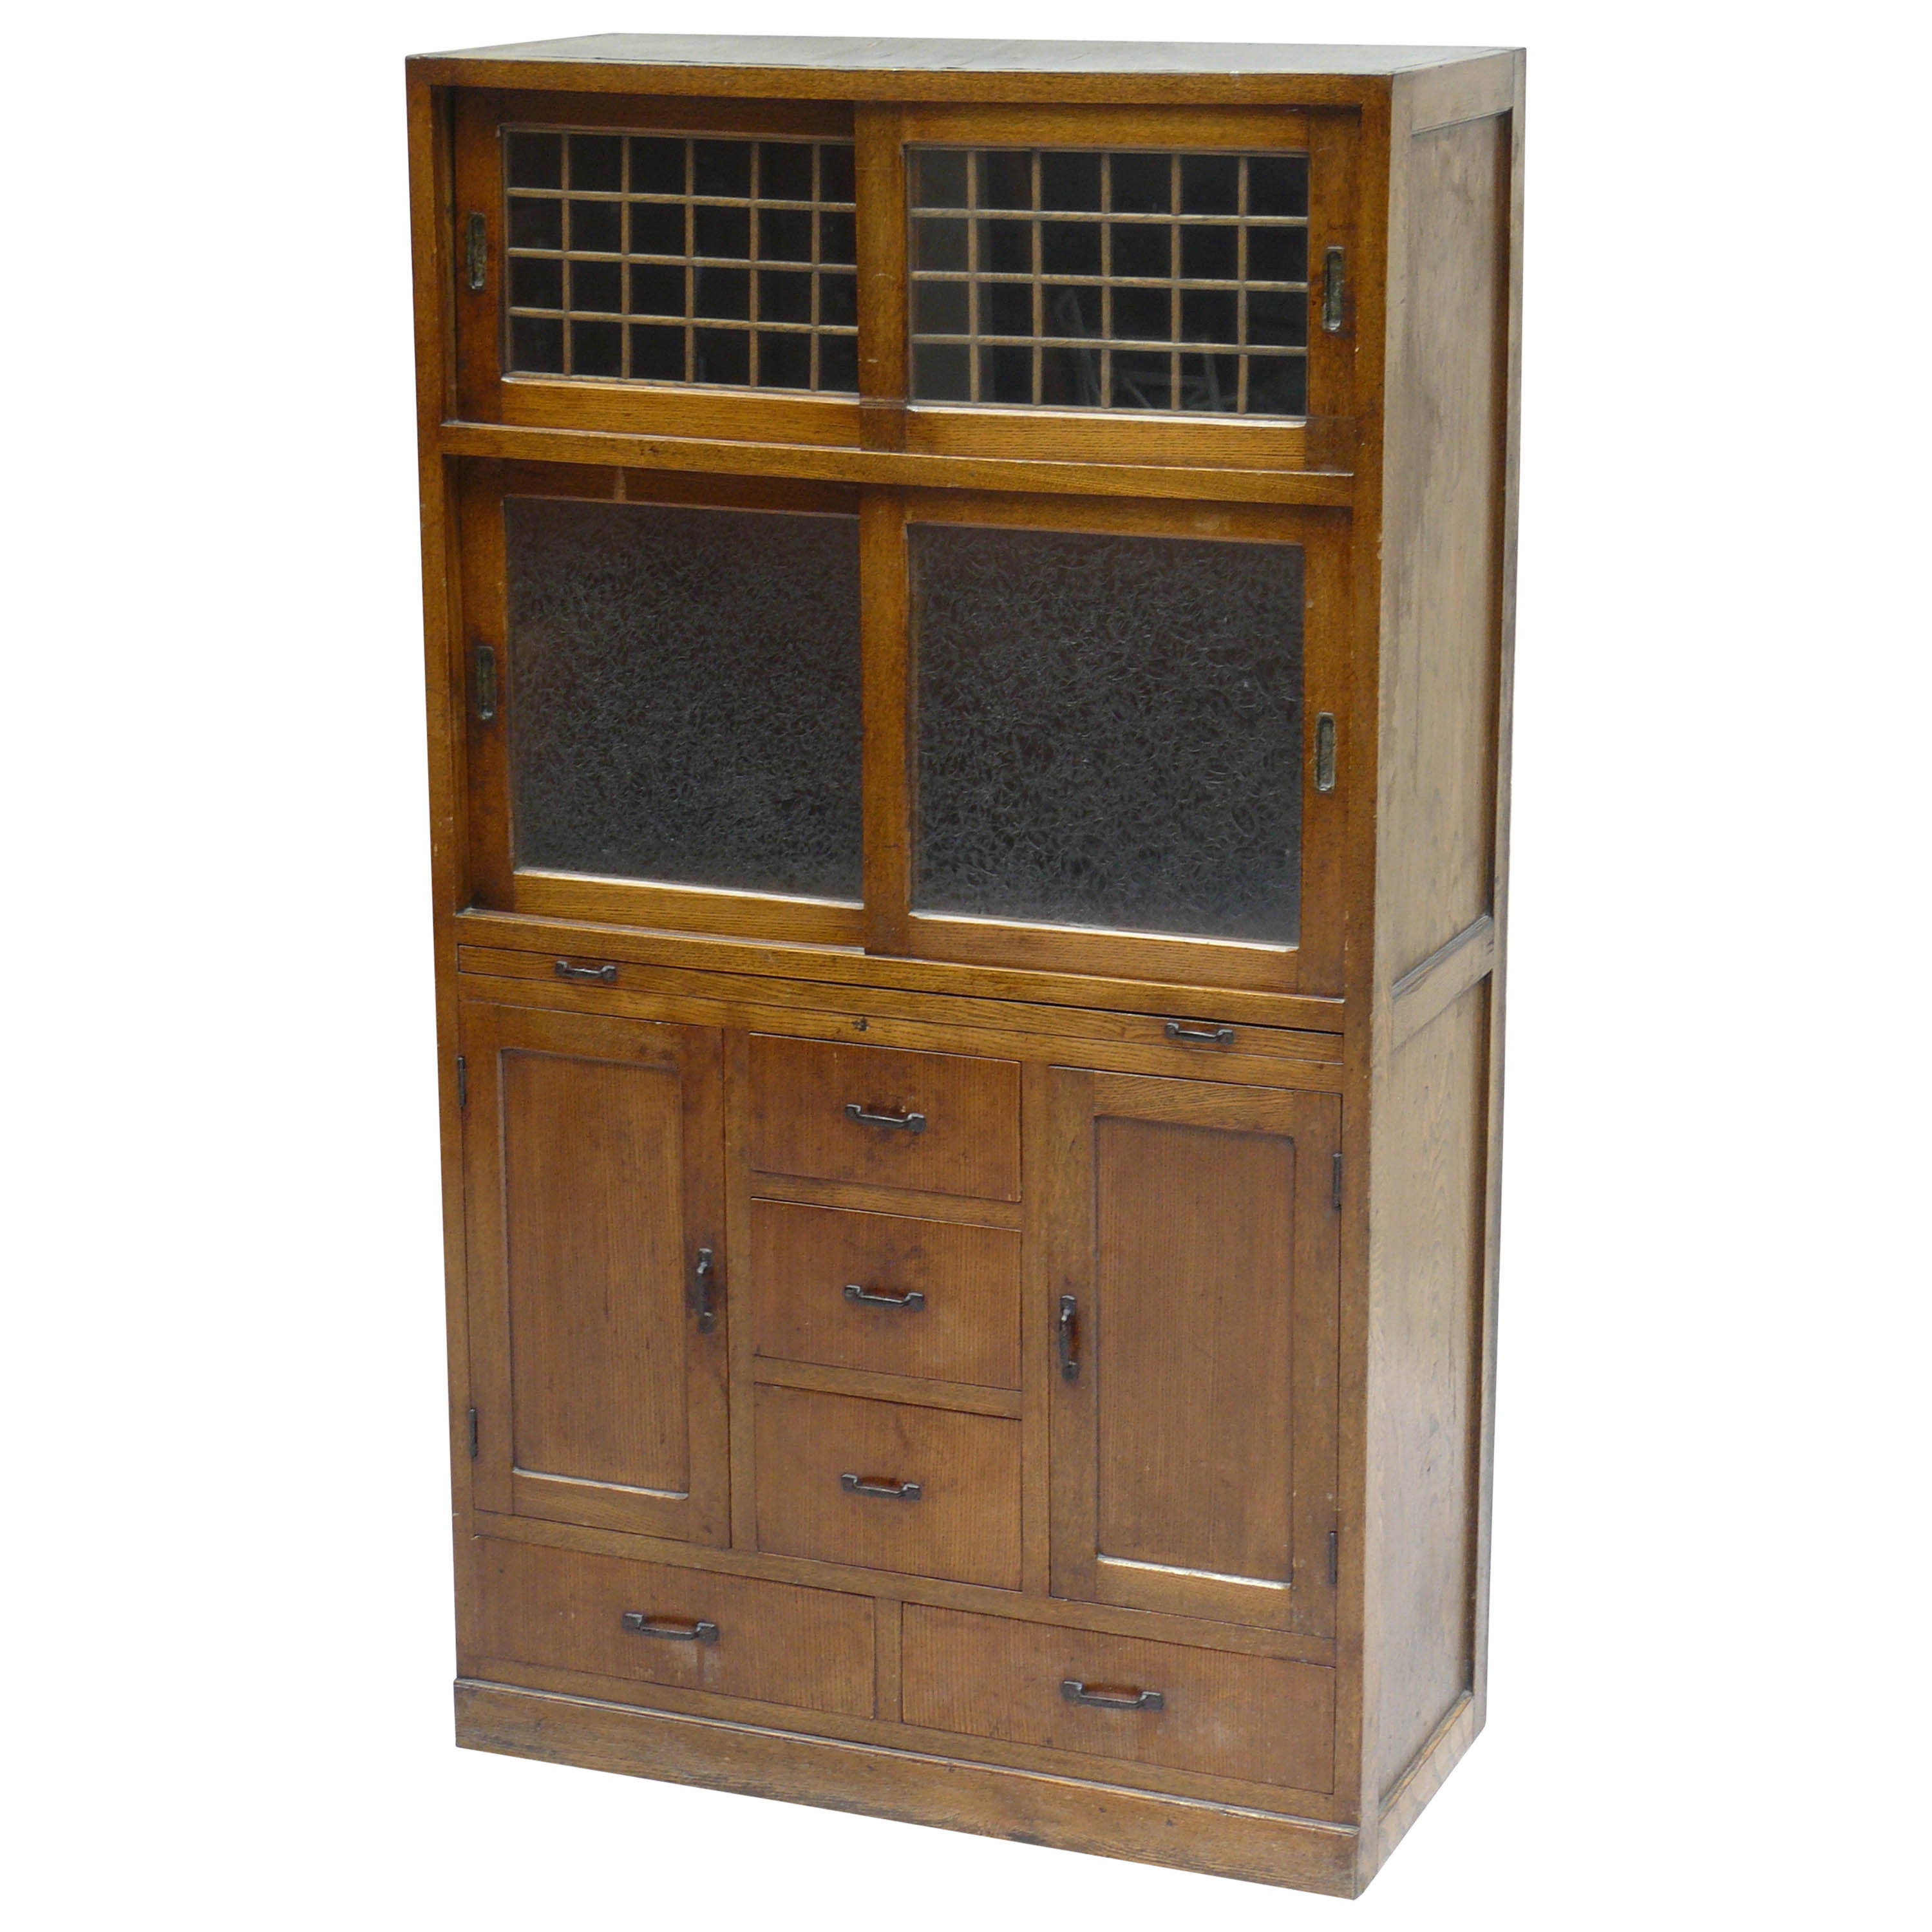 Early 20th Century Japanese Tansu For Sale